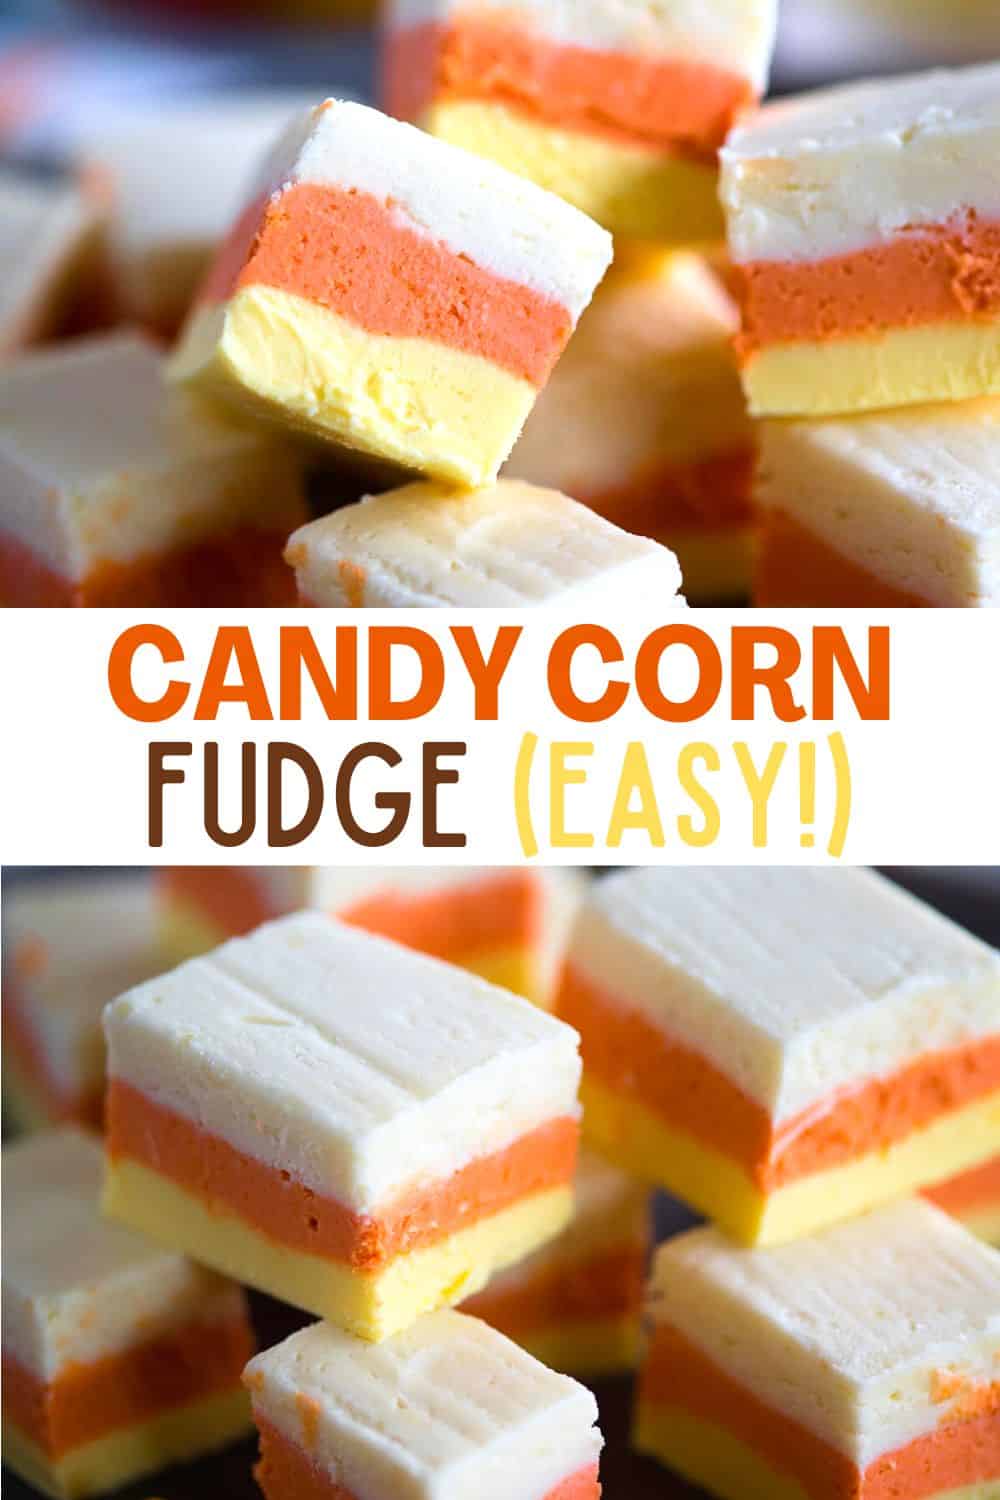 This no-bake candy corn fudge is an easy-to-make Halloween candy with only four ingredients! Melt in your mouth and cute as can be, this easy candy corn fudge recipe is a sweet treat to make with your kids!